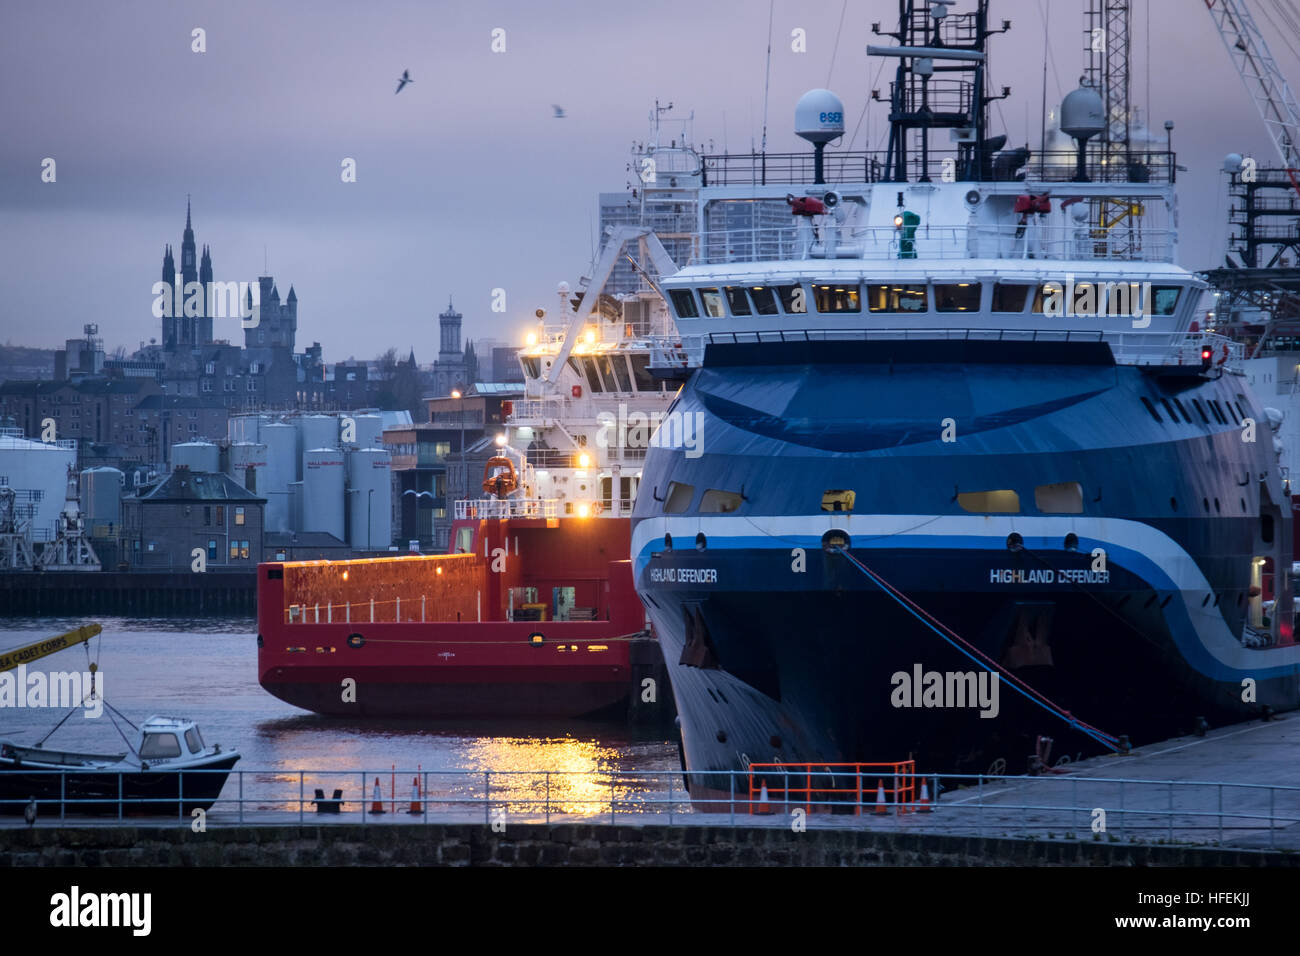 Ships in the port of Aberdeen Stock Photo